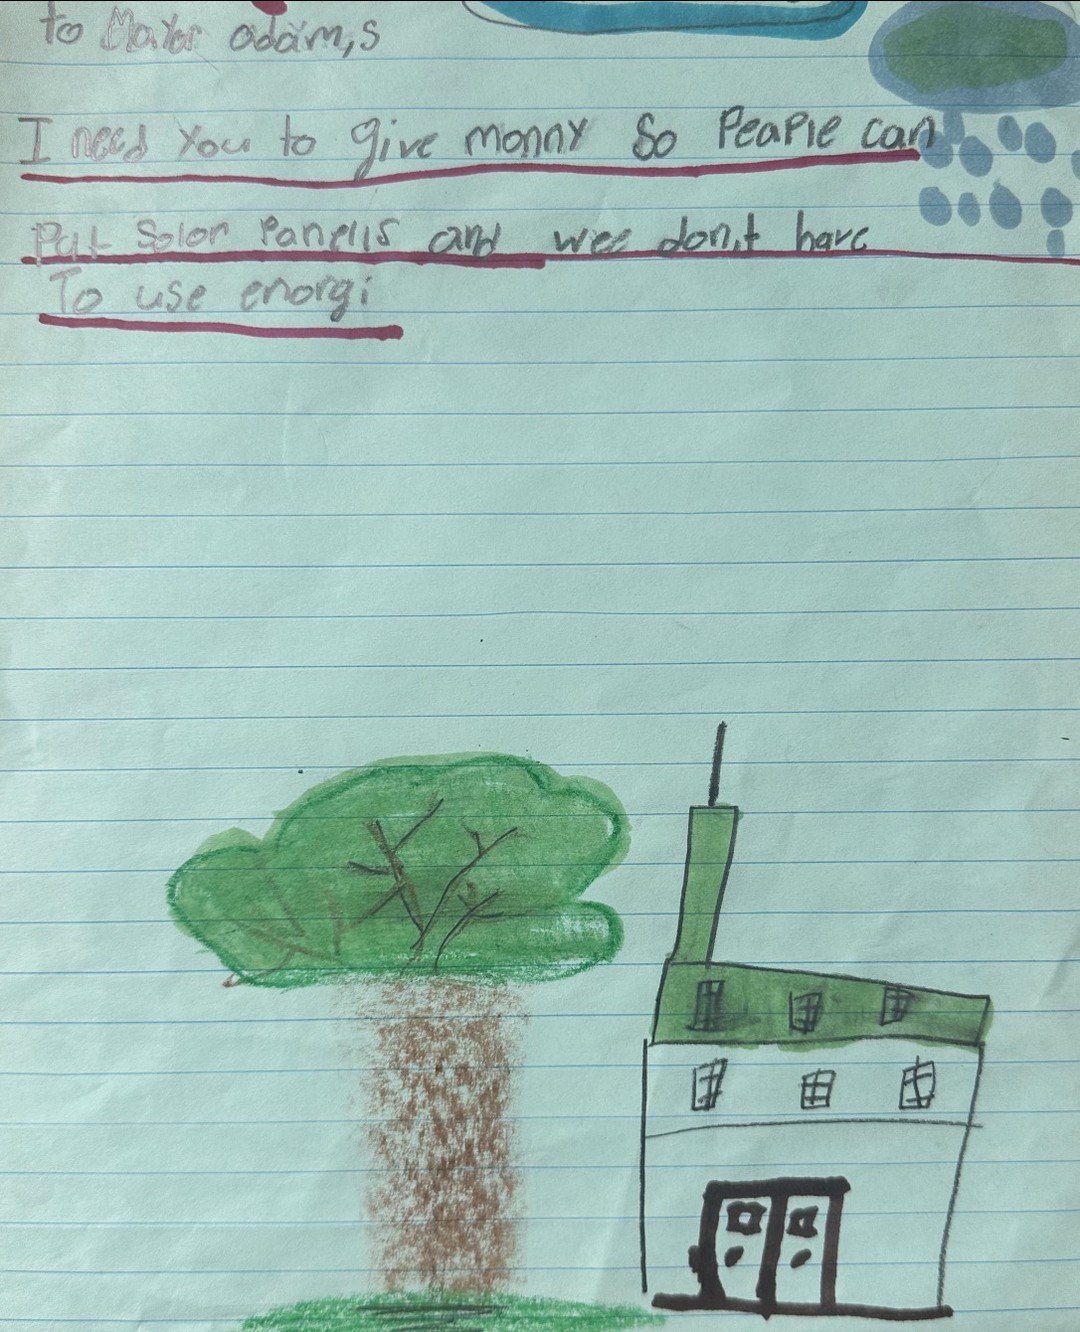 On this Earth Day, we share one of the children's letters from St. Vartan Park Earth Celebration this month&mdash;a call for solar panels, as part of @climatefamsnyc's Green and Healthy School Campaign. 

In the park, a fun writing and drawing area c